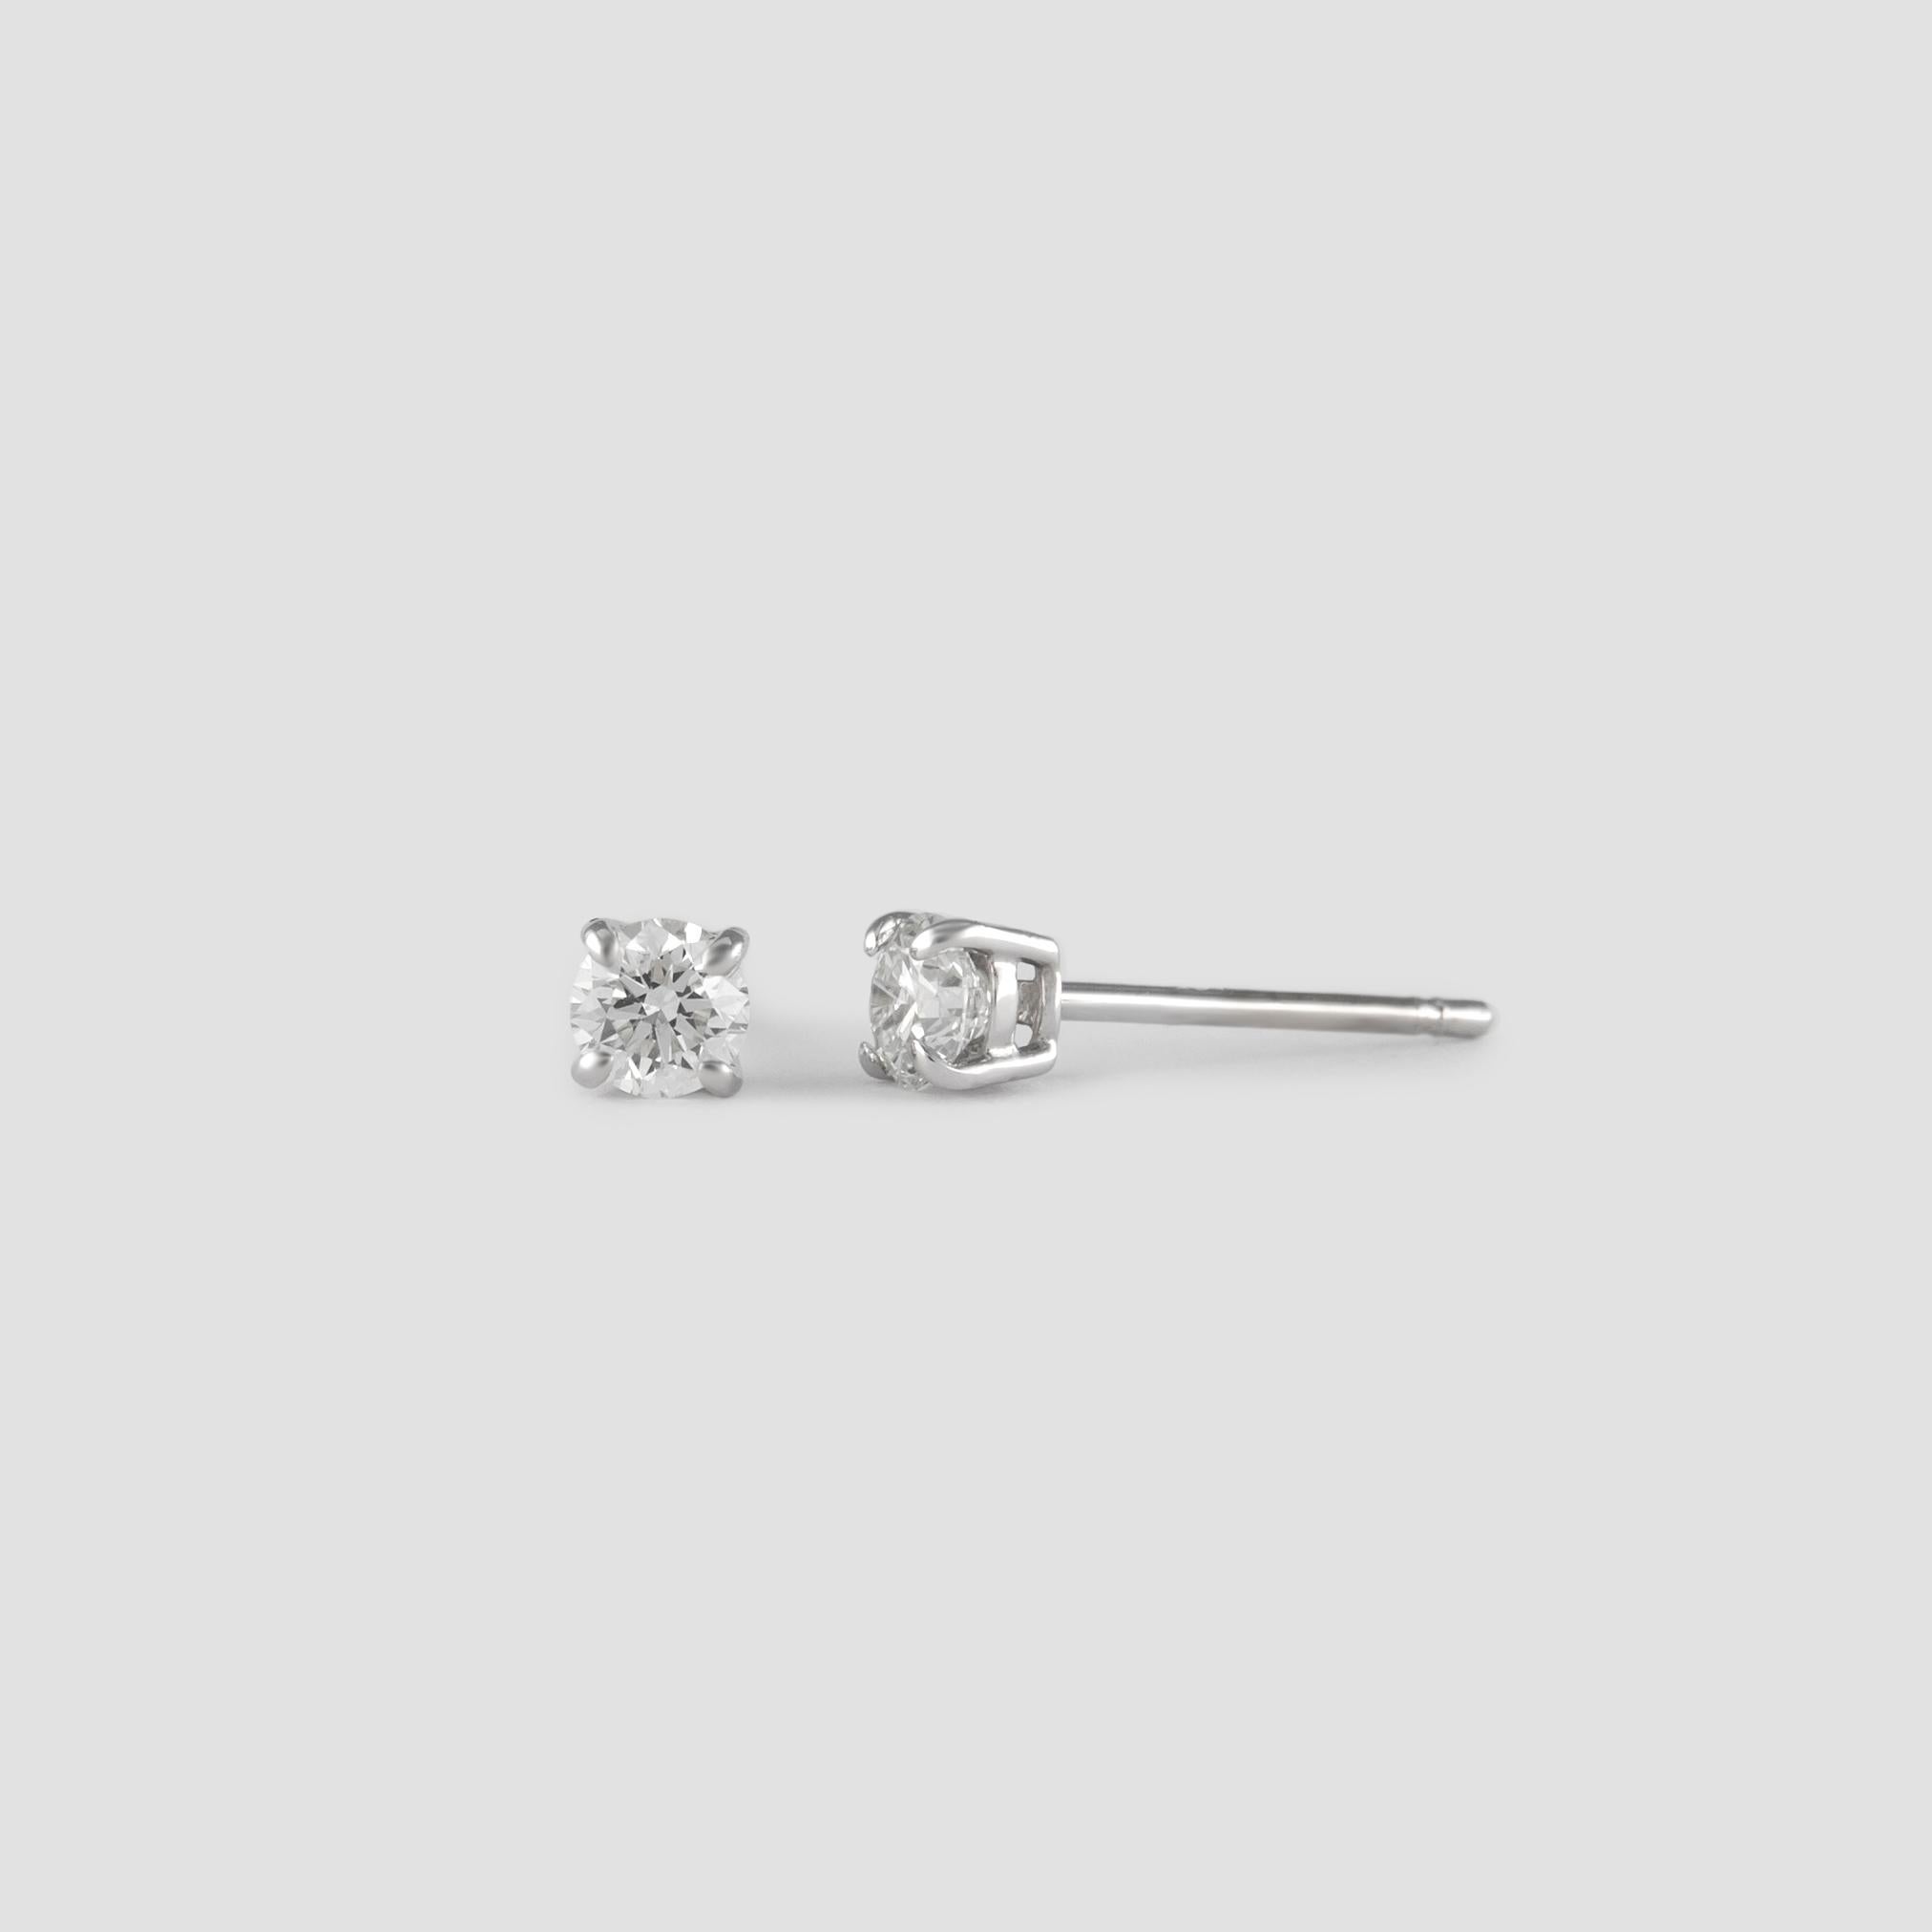 Classic diamond stud earrings. By Alexander of Beverly Hills.
Two round brilliant diamonds 0.30 carats total. Approximately G/H color and SI1 clarity. Four prong set, 14k white gold. 
Accommodated with an up to date appraisal by a GIA G.G., please